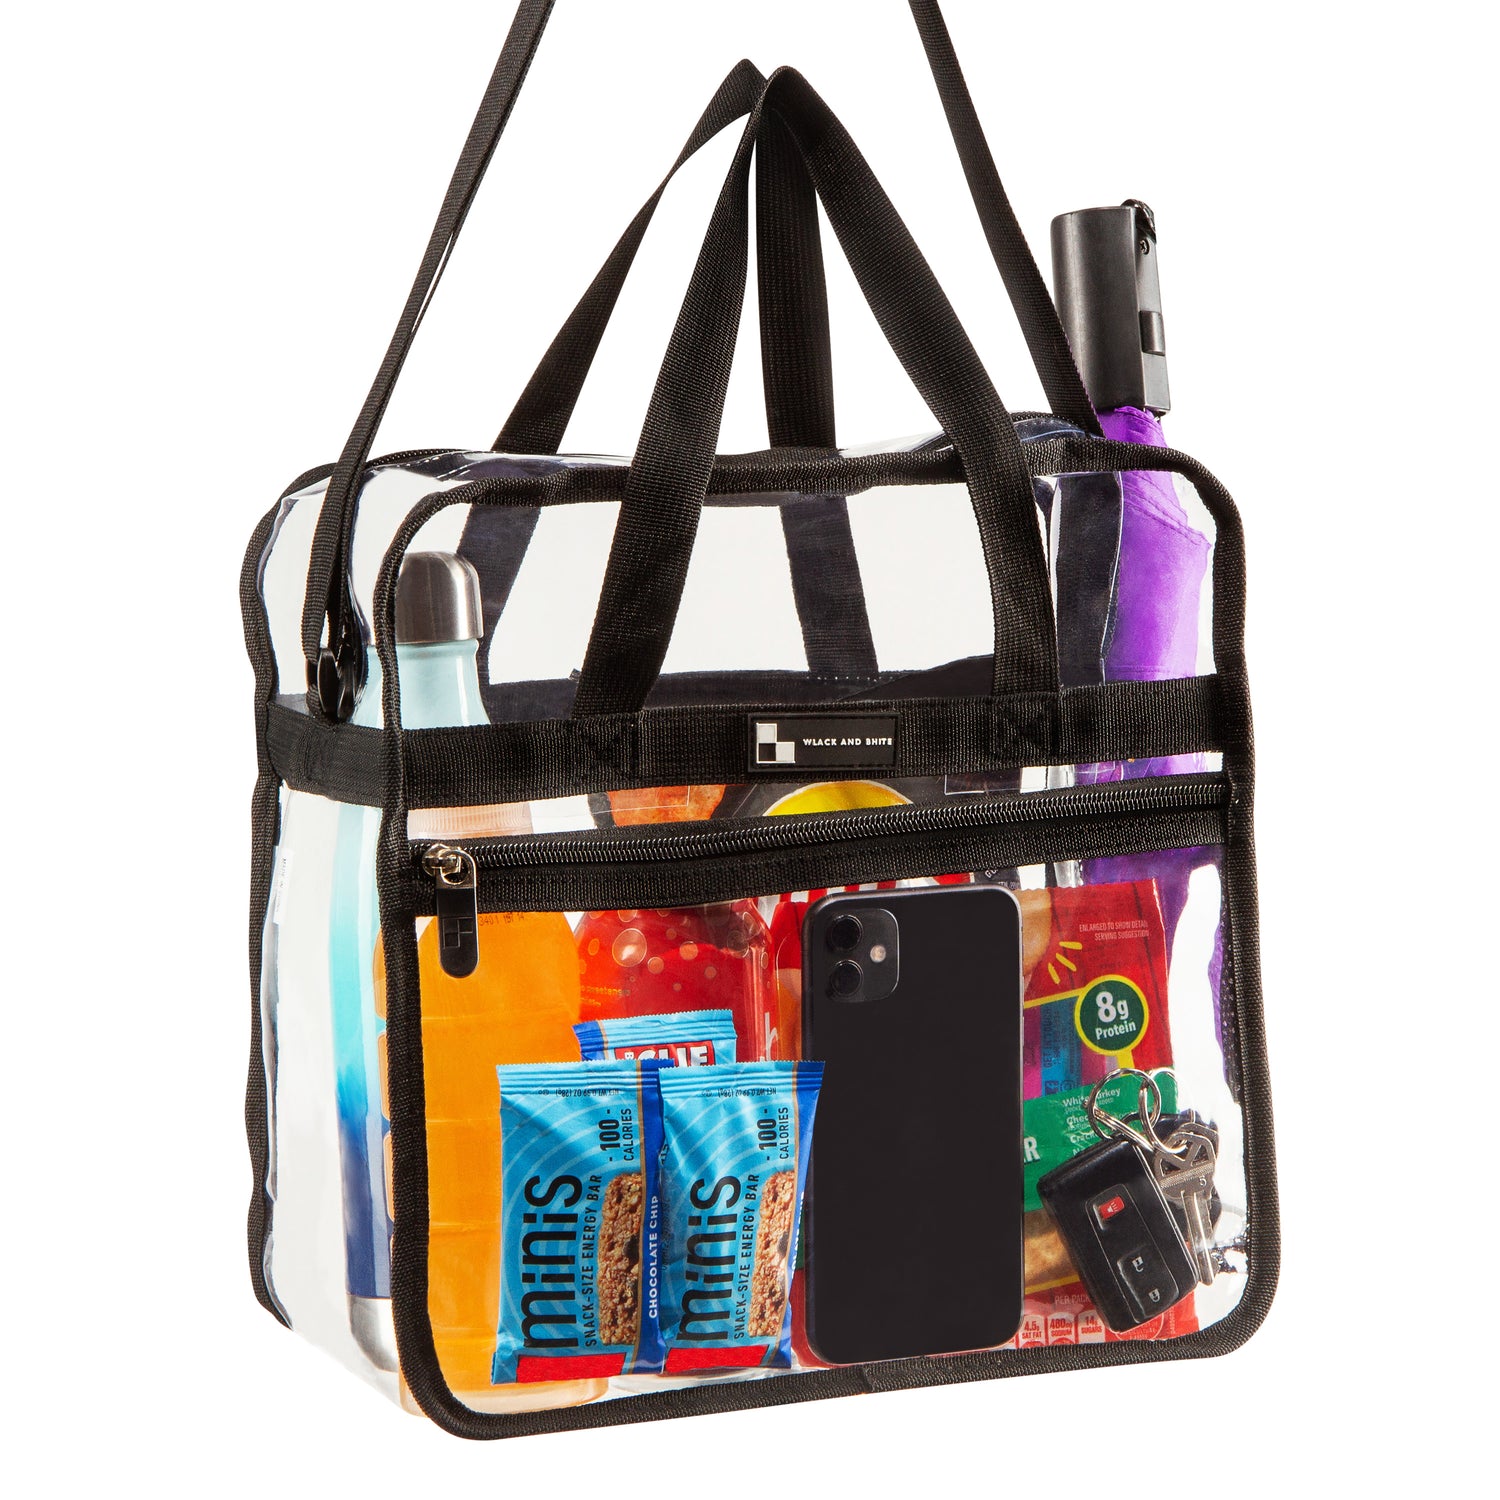 Clear Bag NFL & Pga Stadium Approved The Clear Tote Bag with Zipper Closure